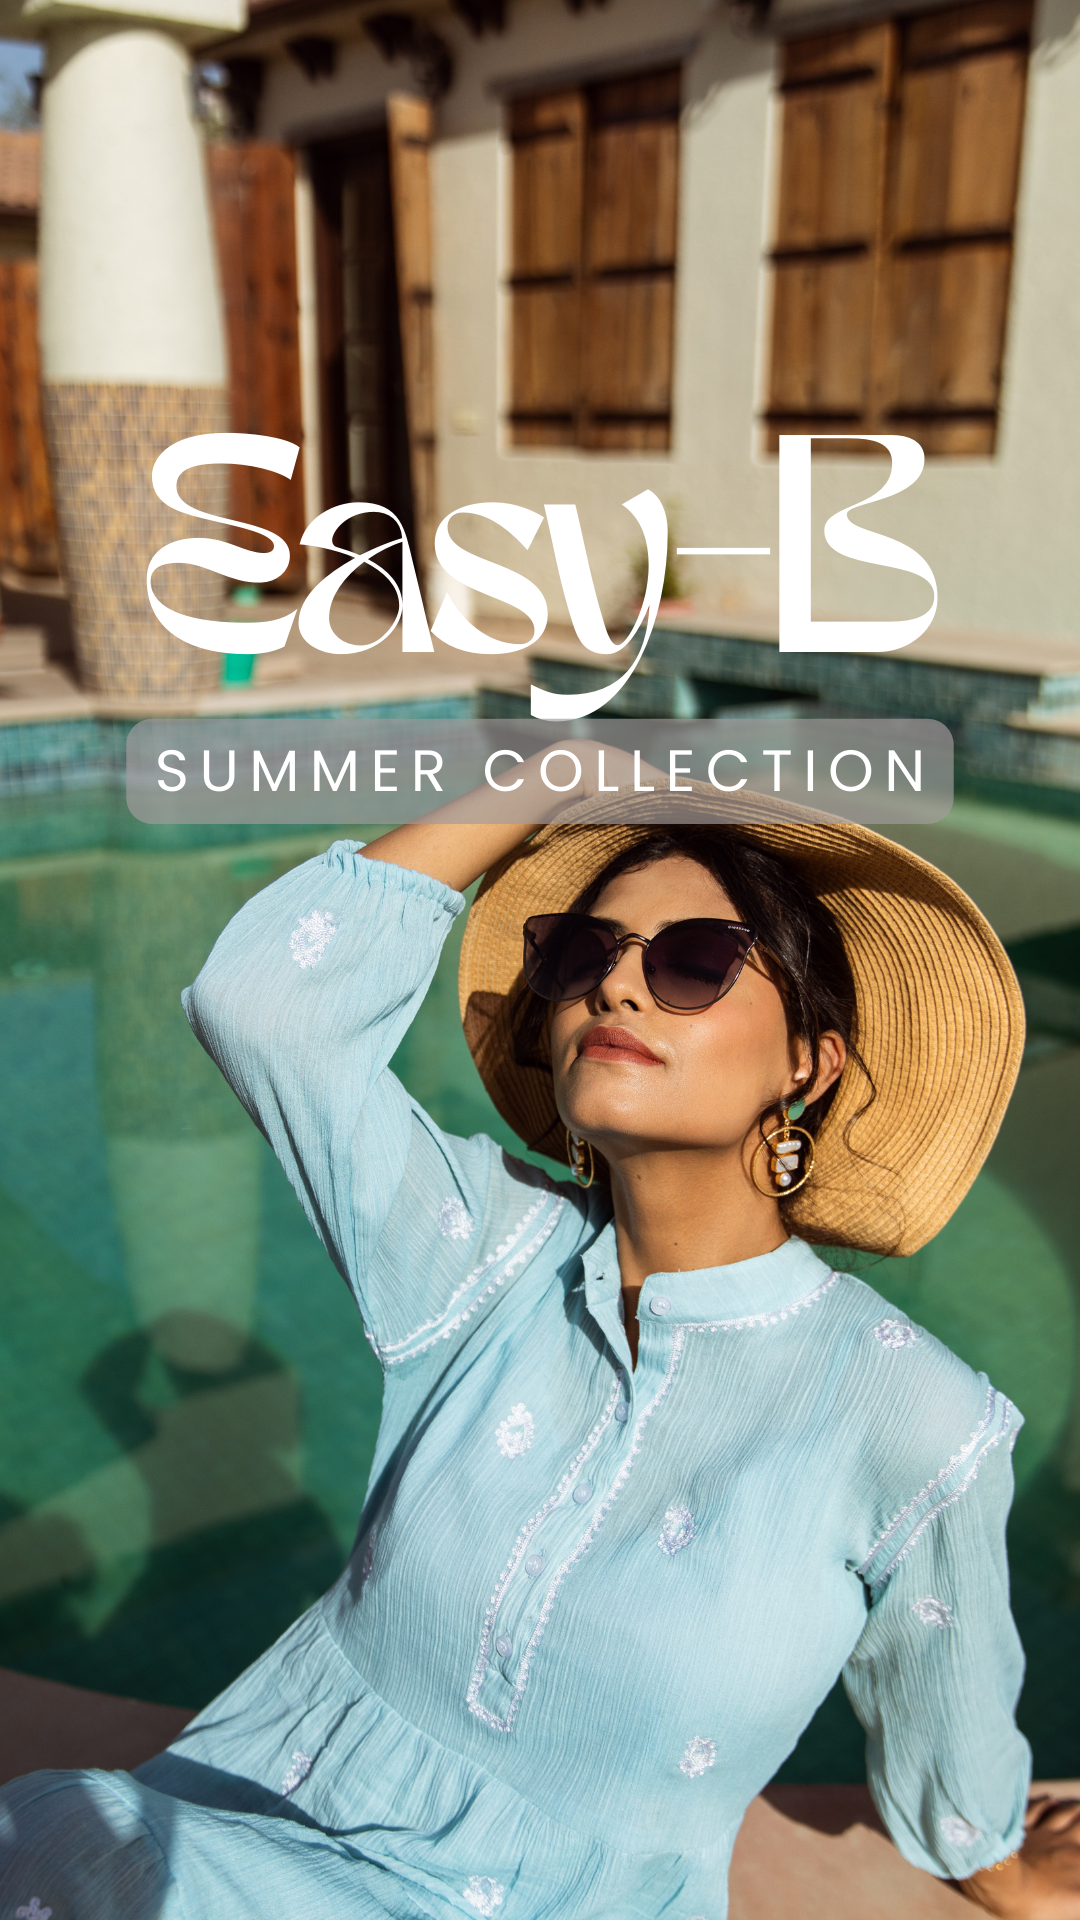 Easy B Summer Collection